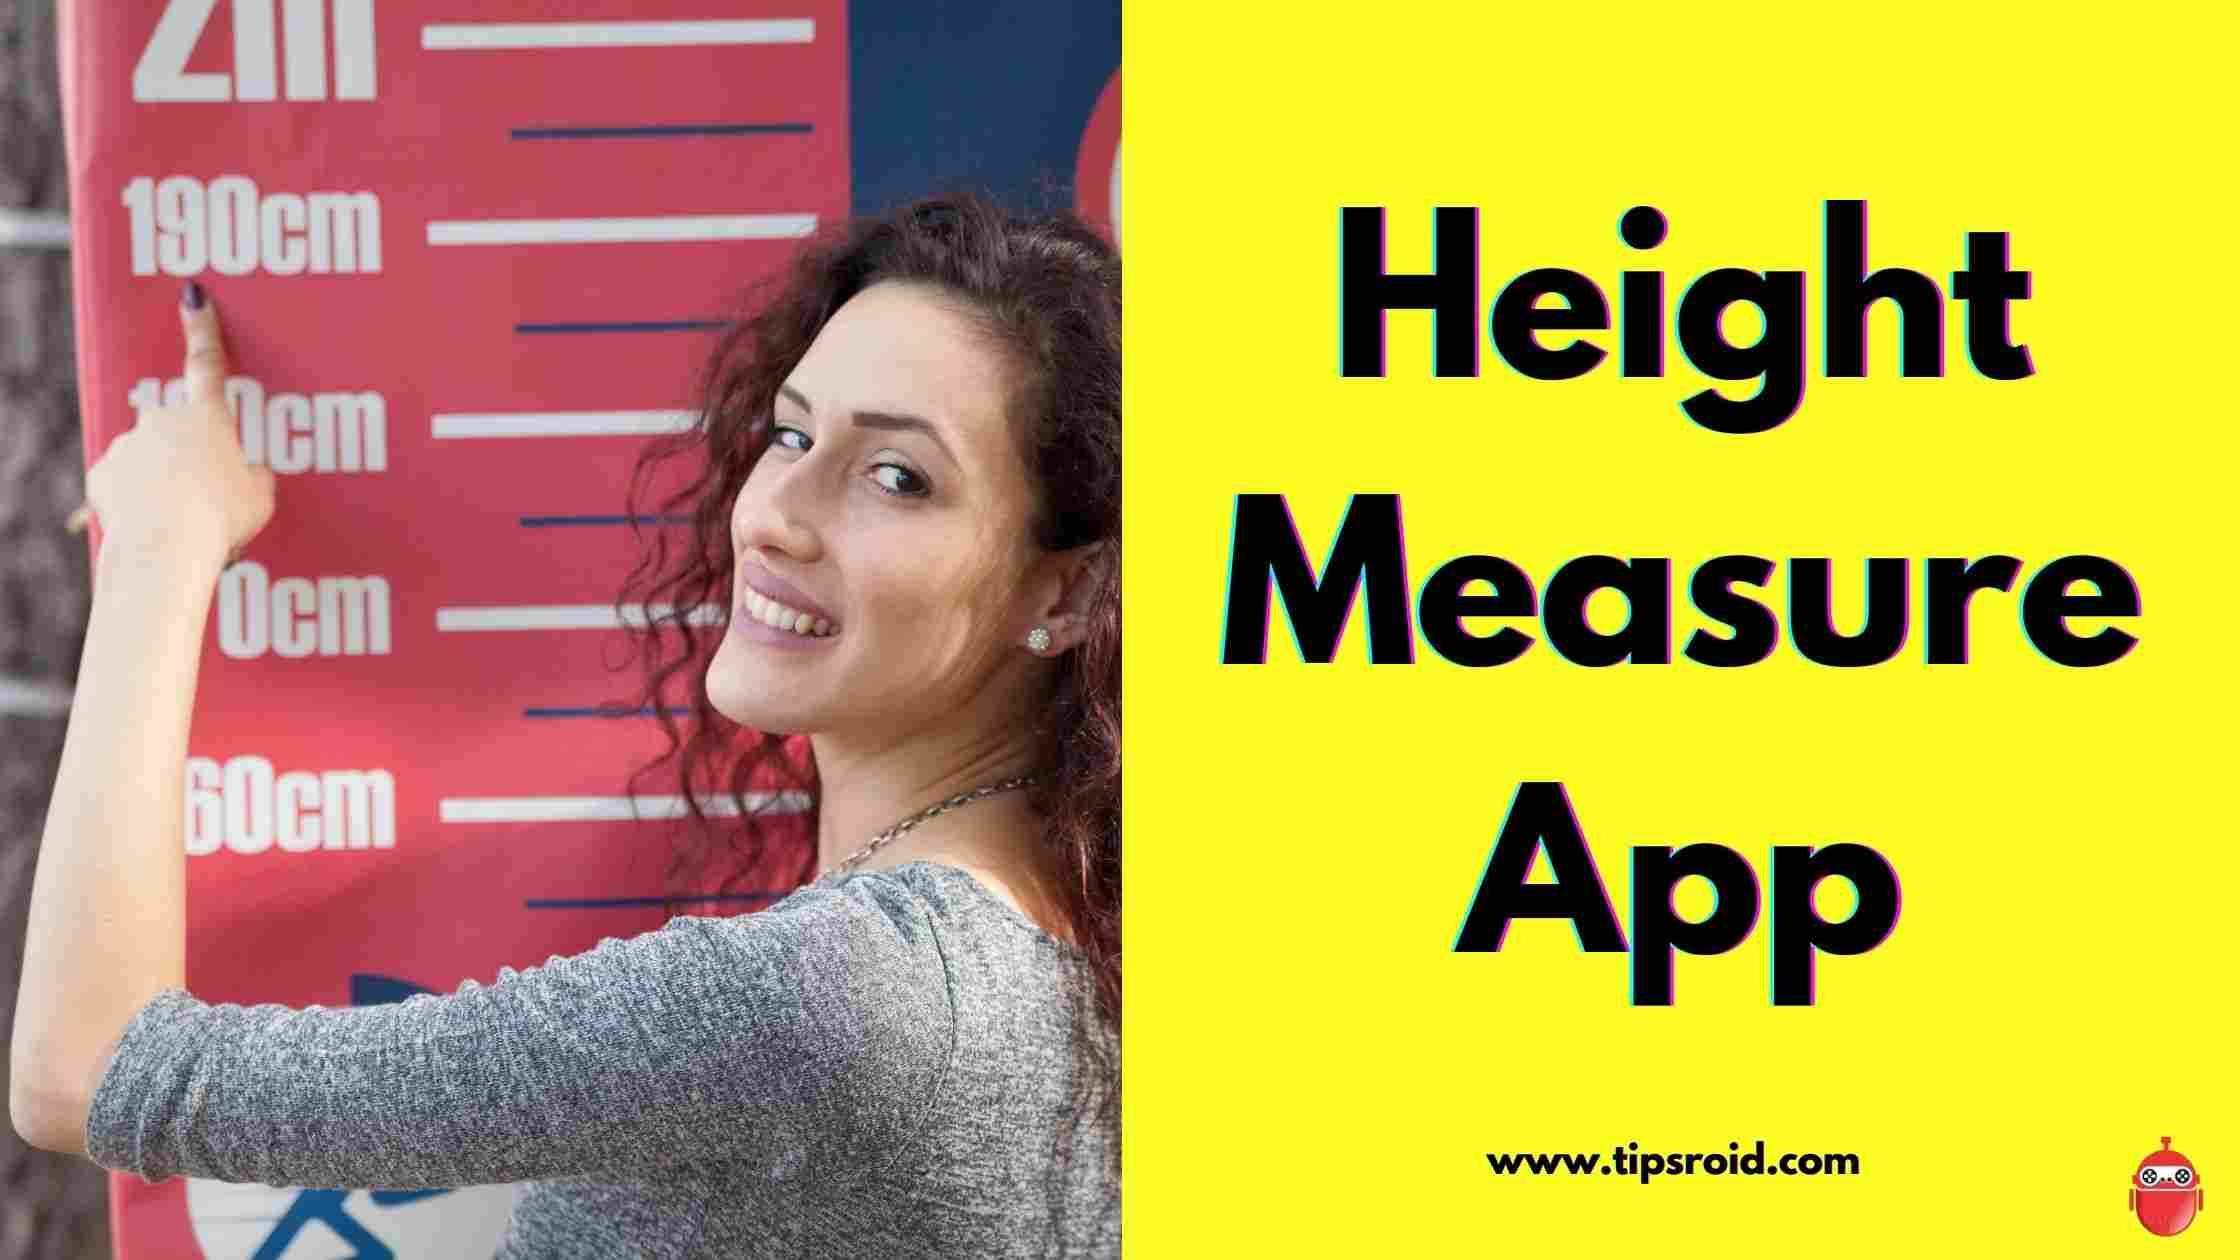 8 Best Height Measure App For Android And iPhone